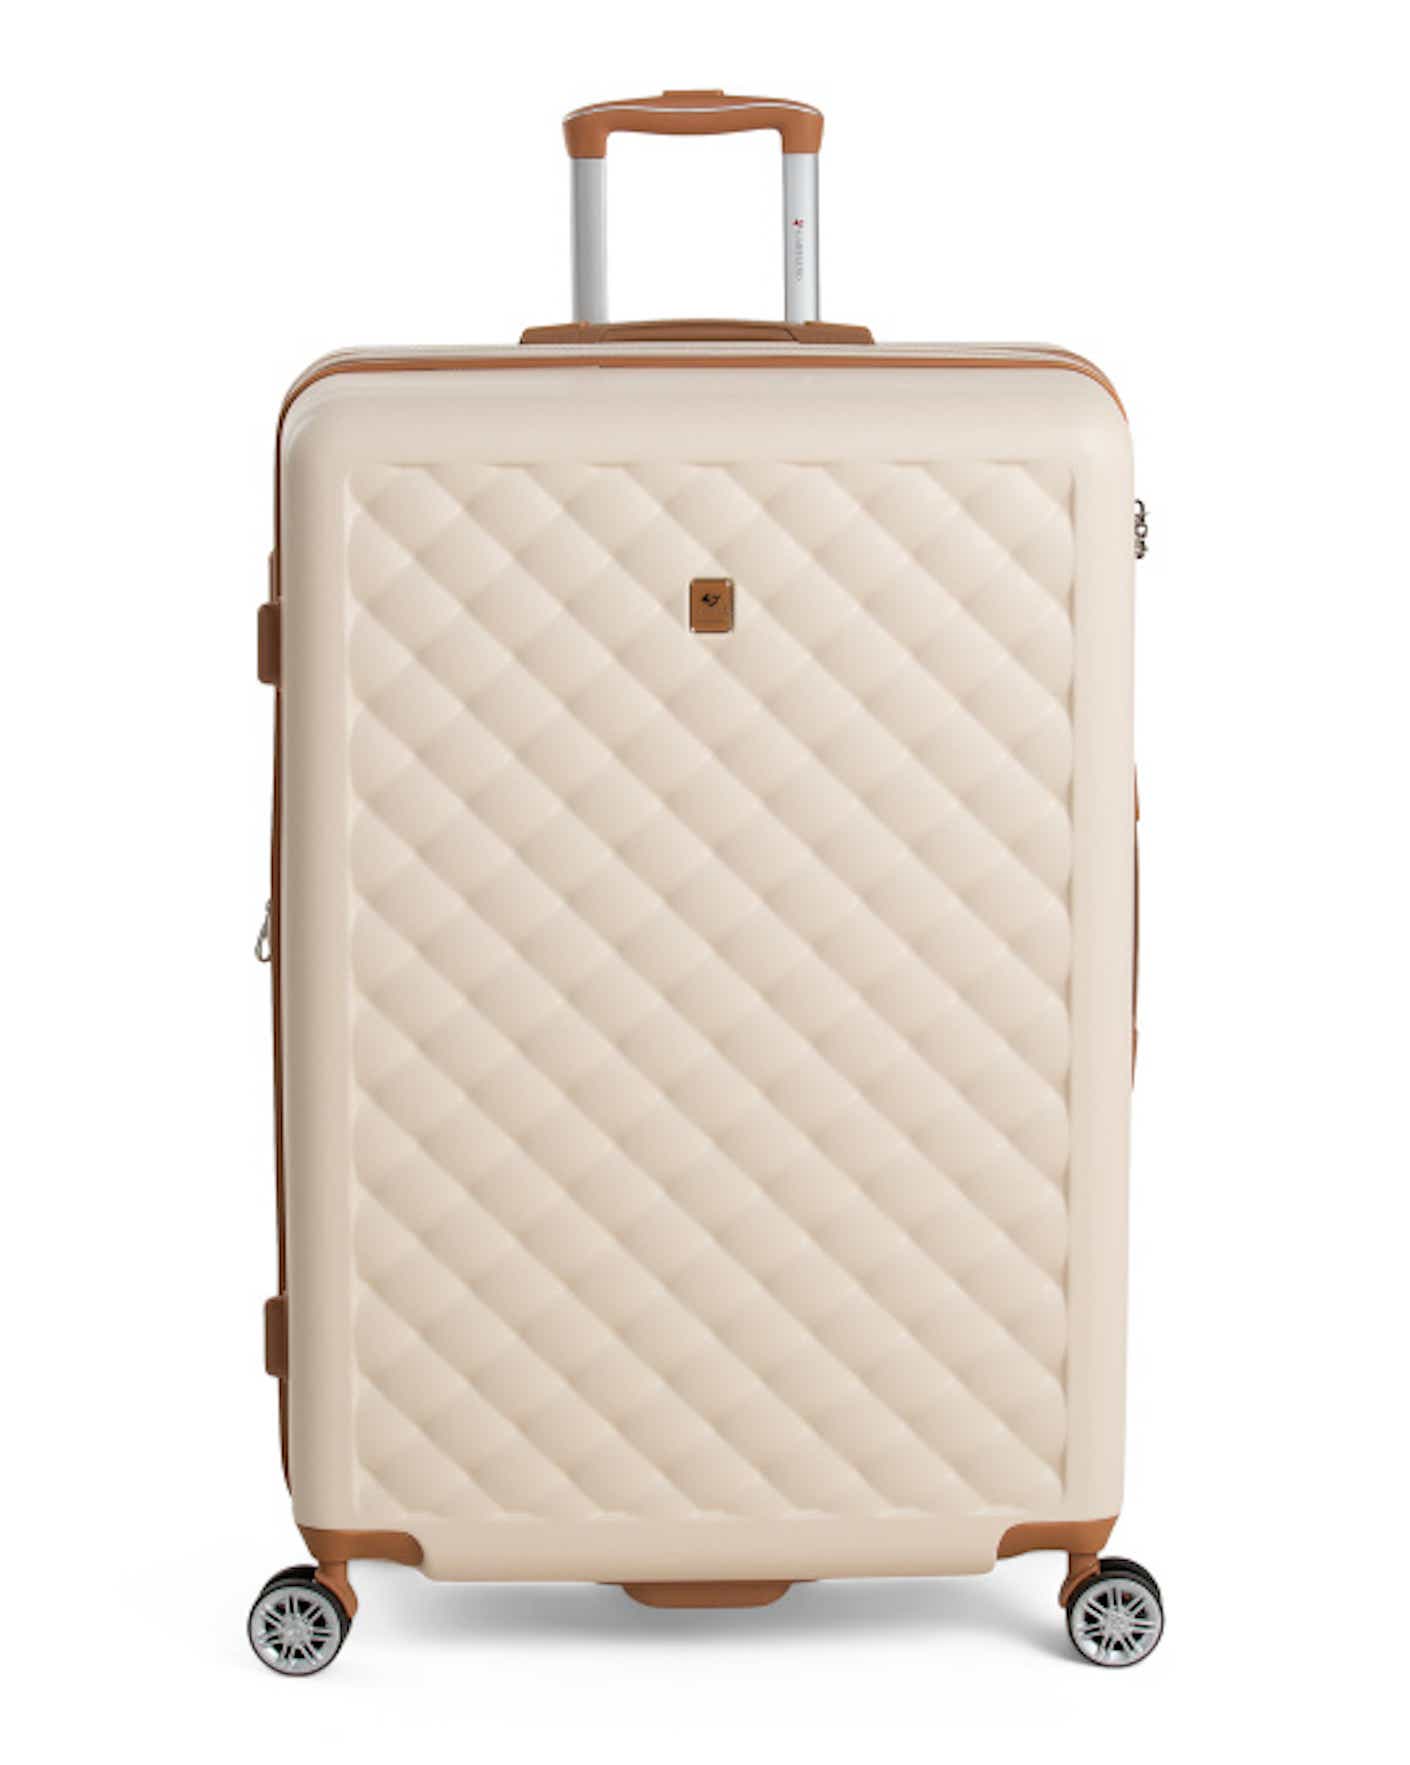 A cream colored suitcase with textured detailing and maroon detailing against a white background.